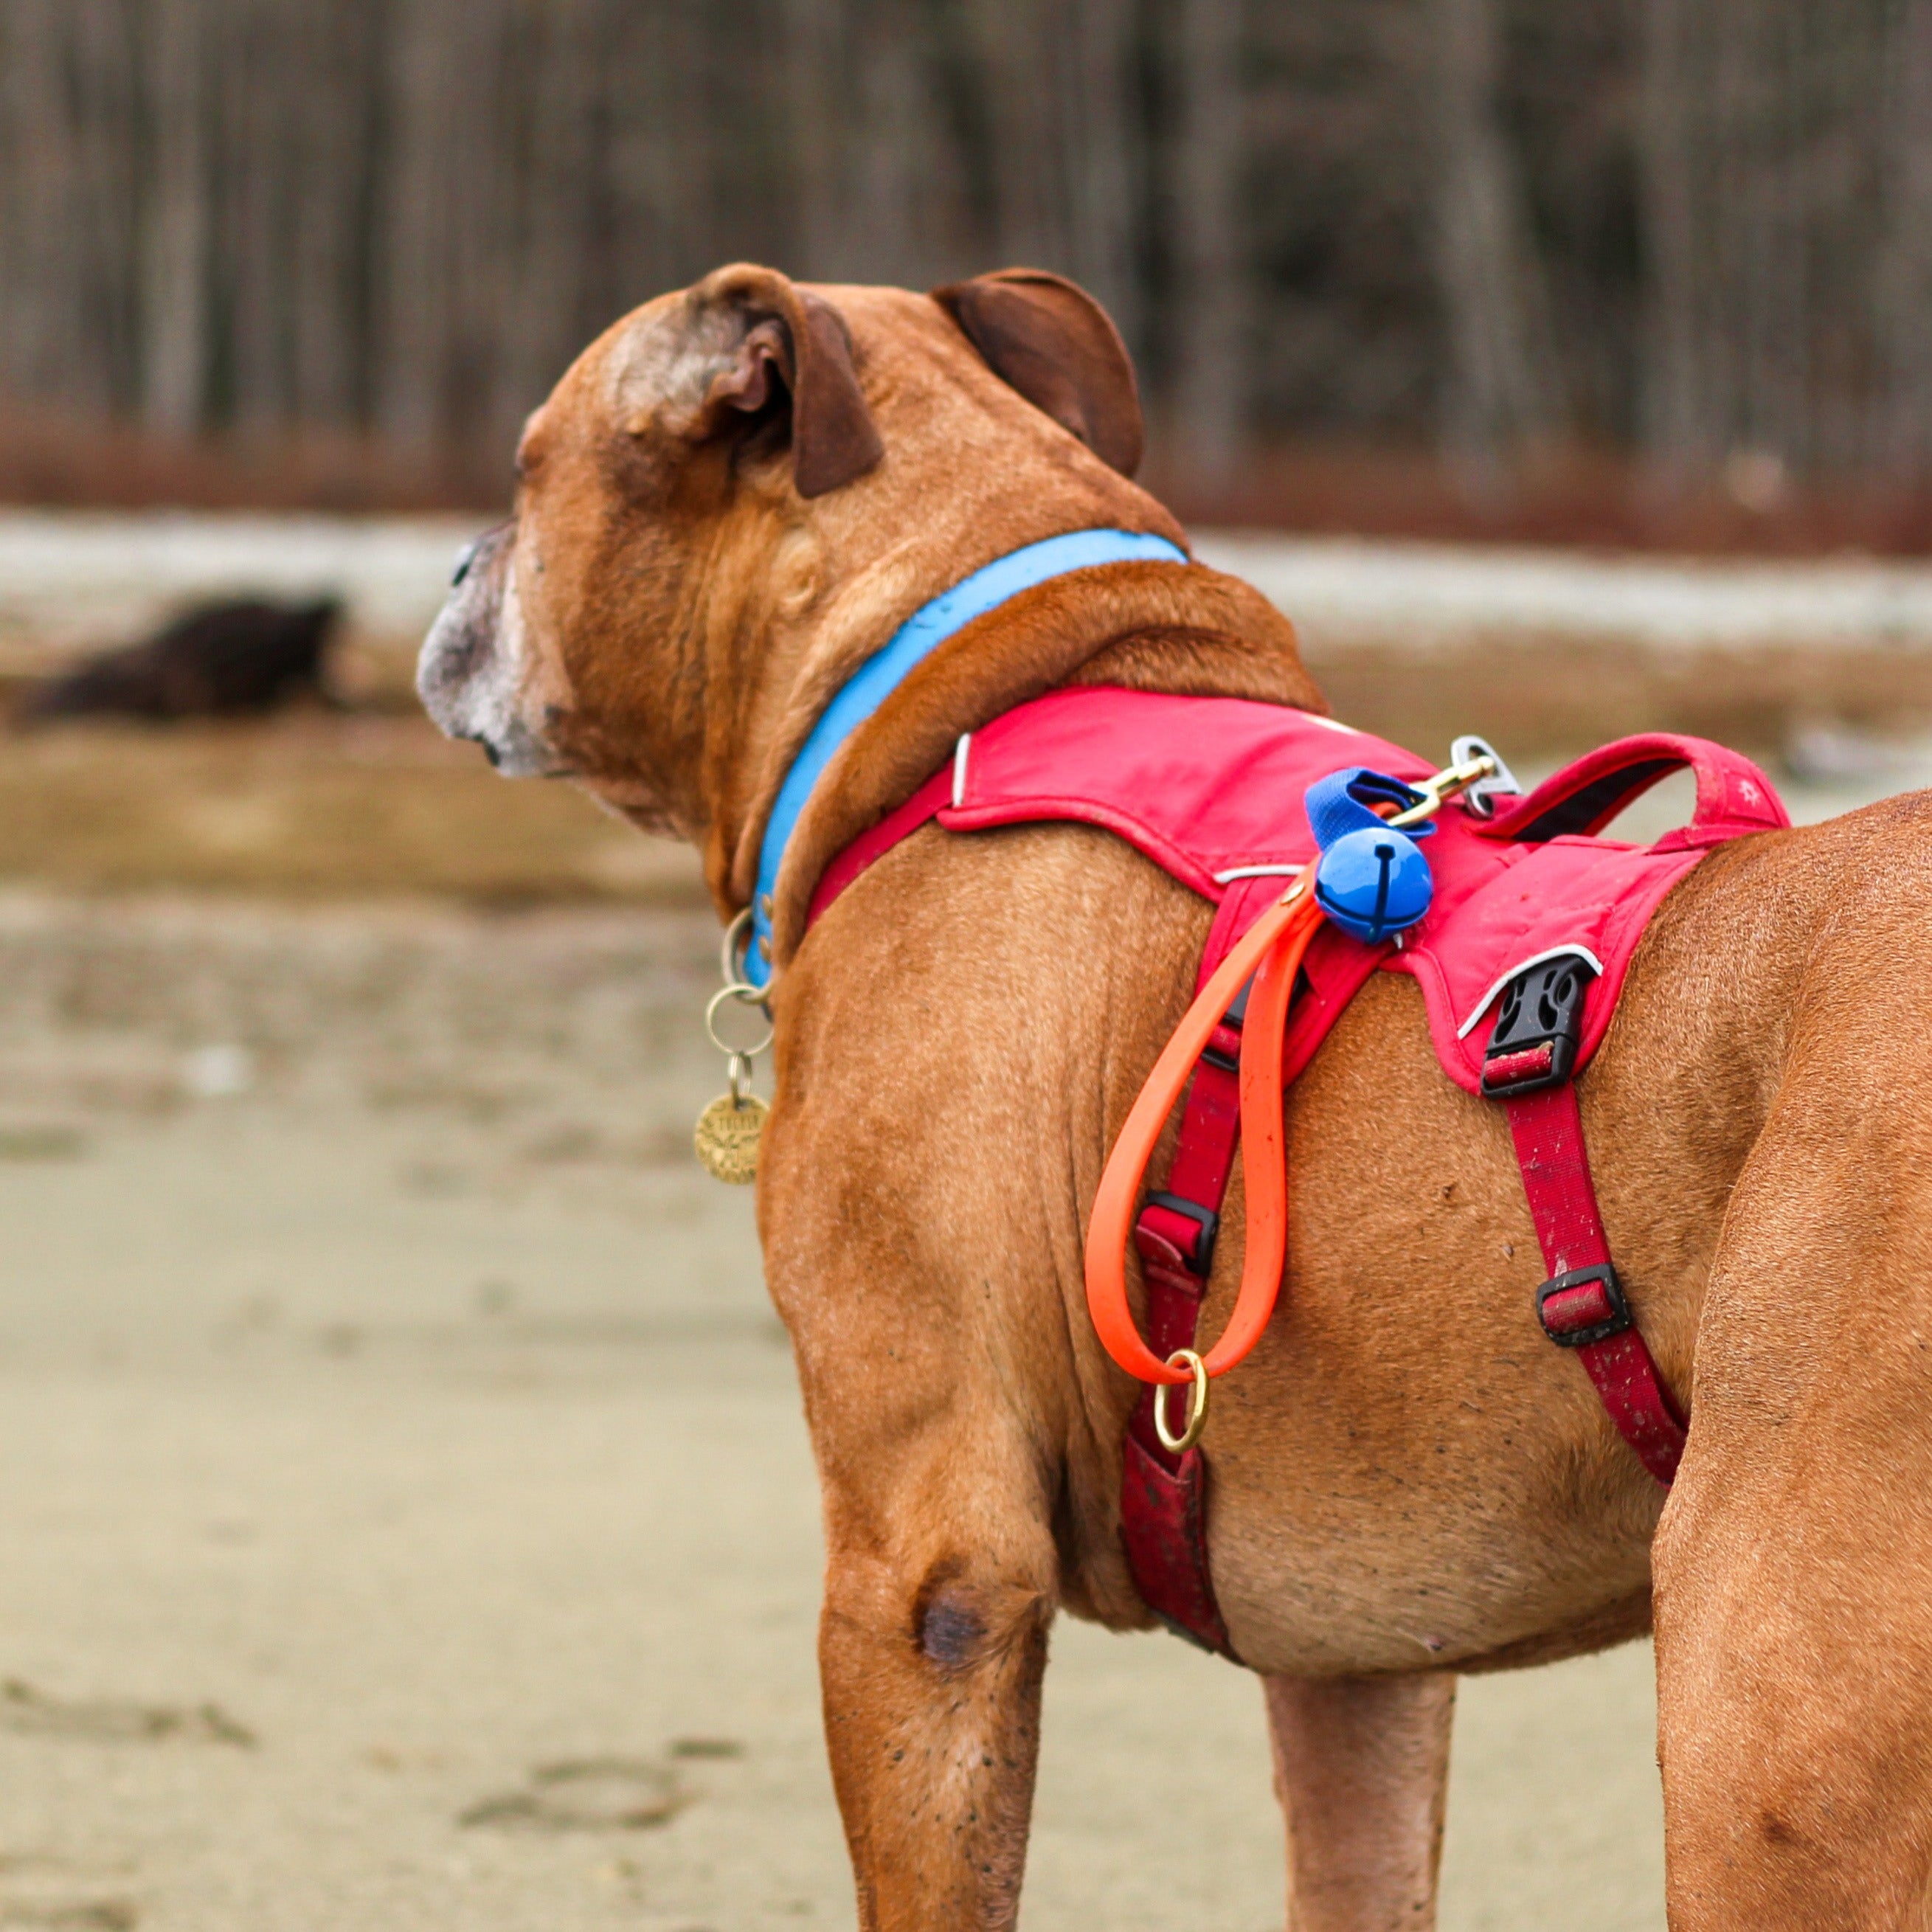 dog out exploring nature wearing a red ruffwear dog harness and an orange biothane grab handle and a bear bell